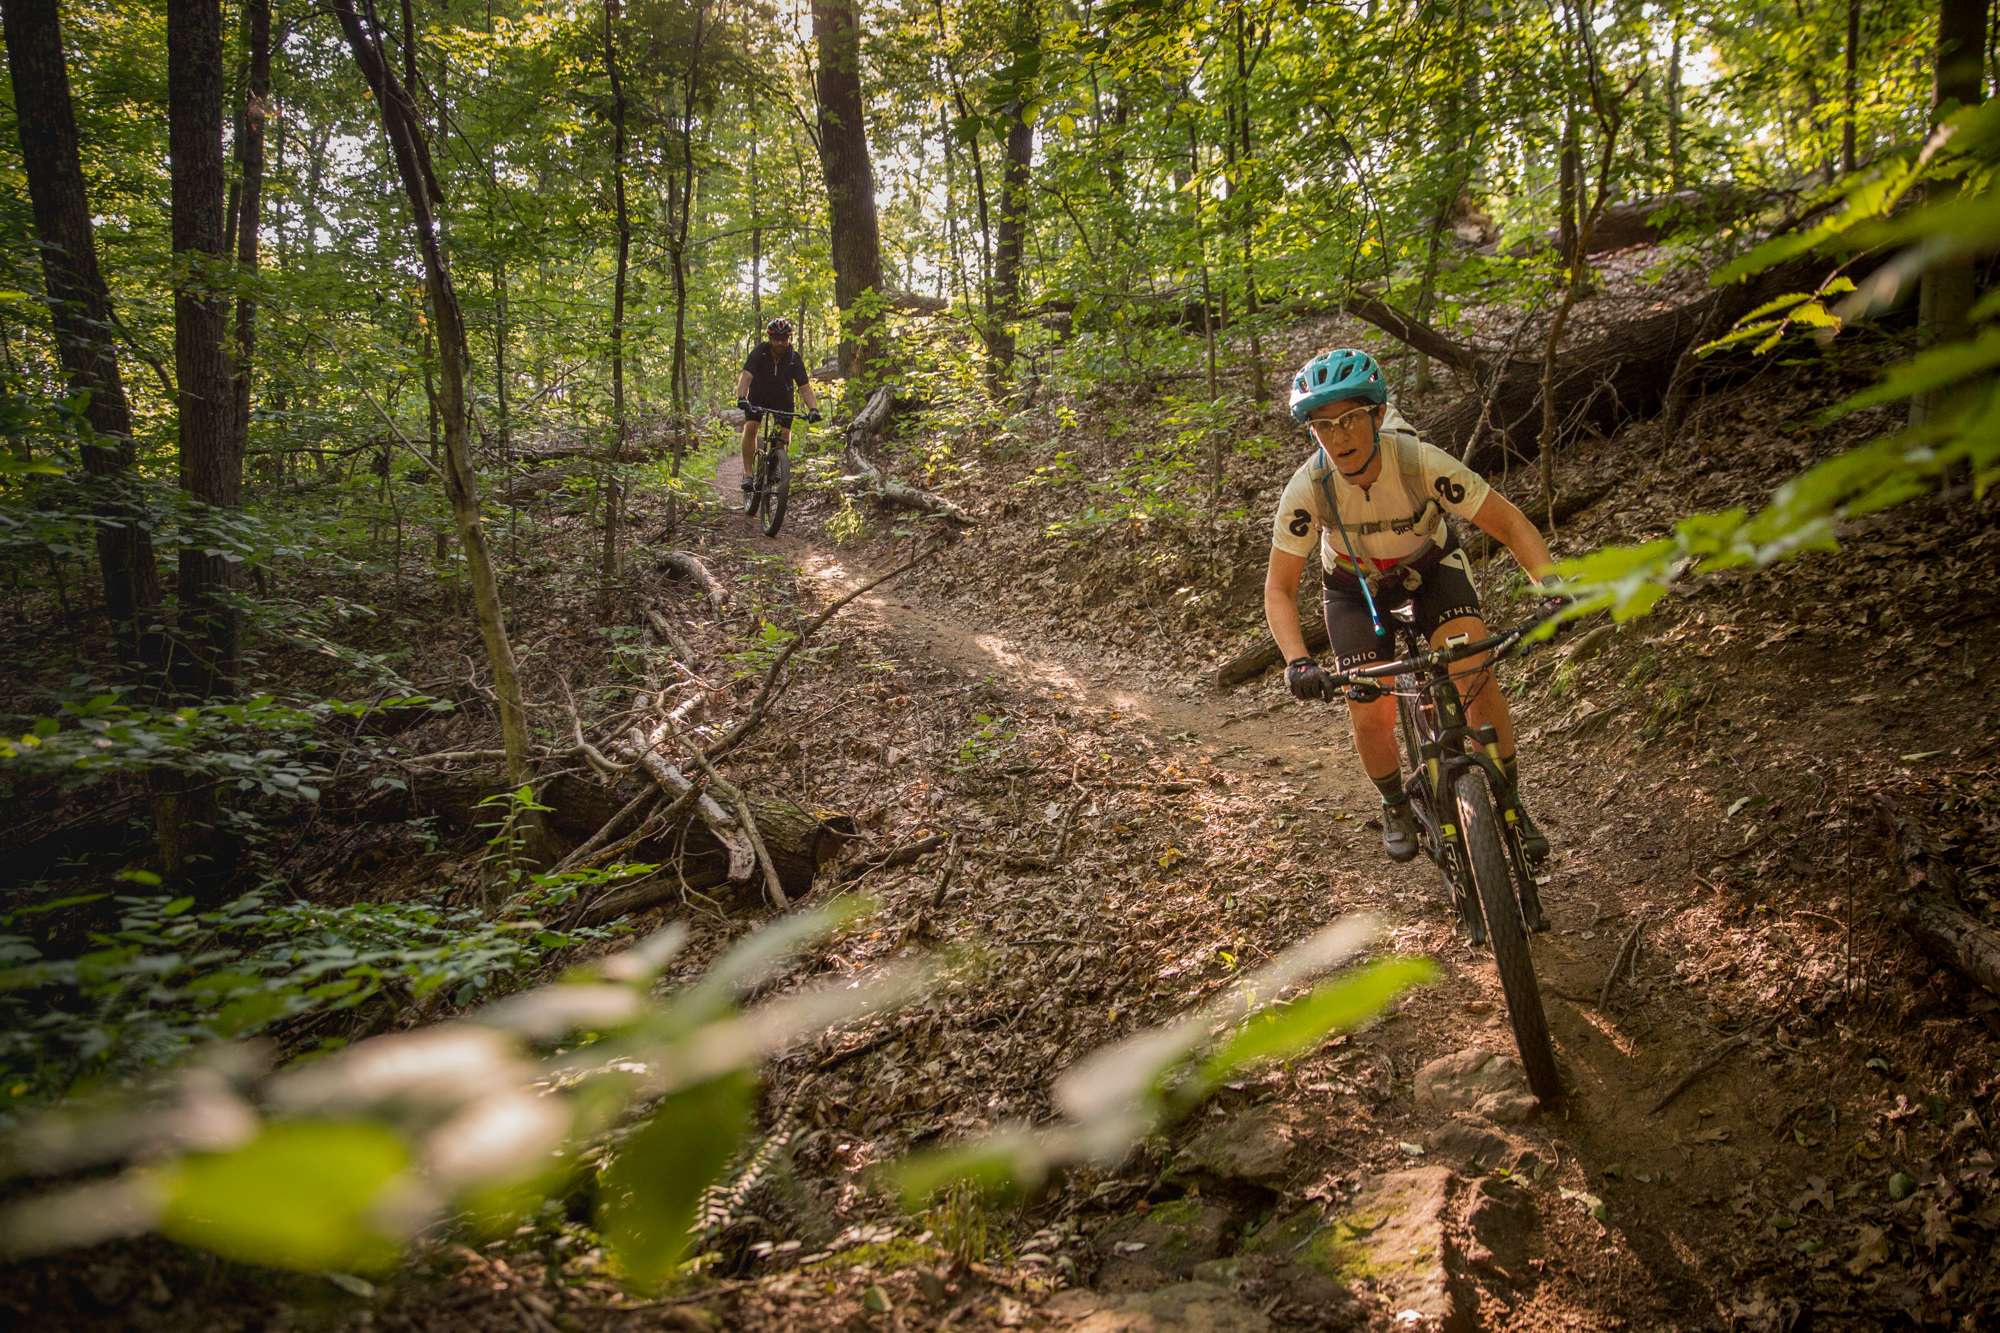 Mountain bikers make their way down a winding forest trail